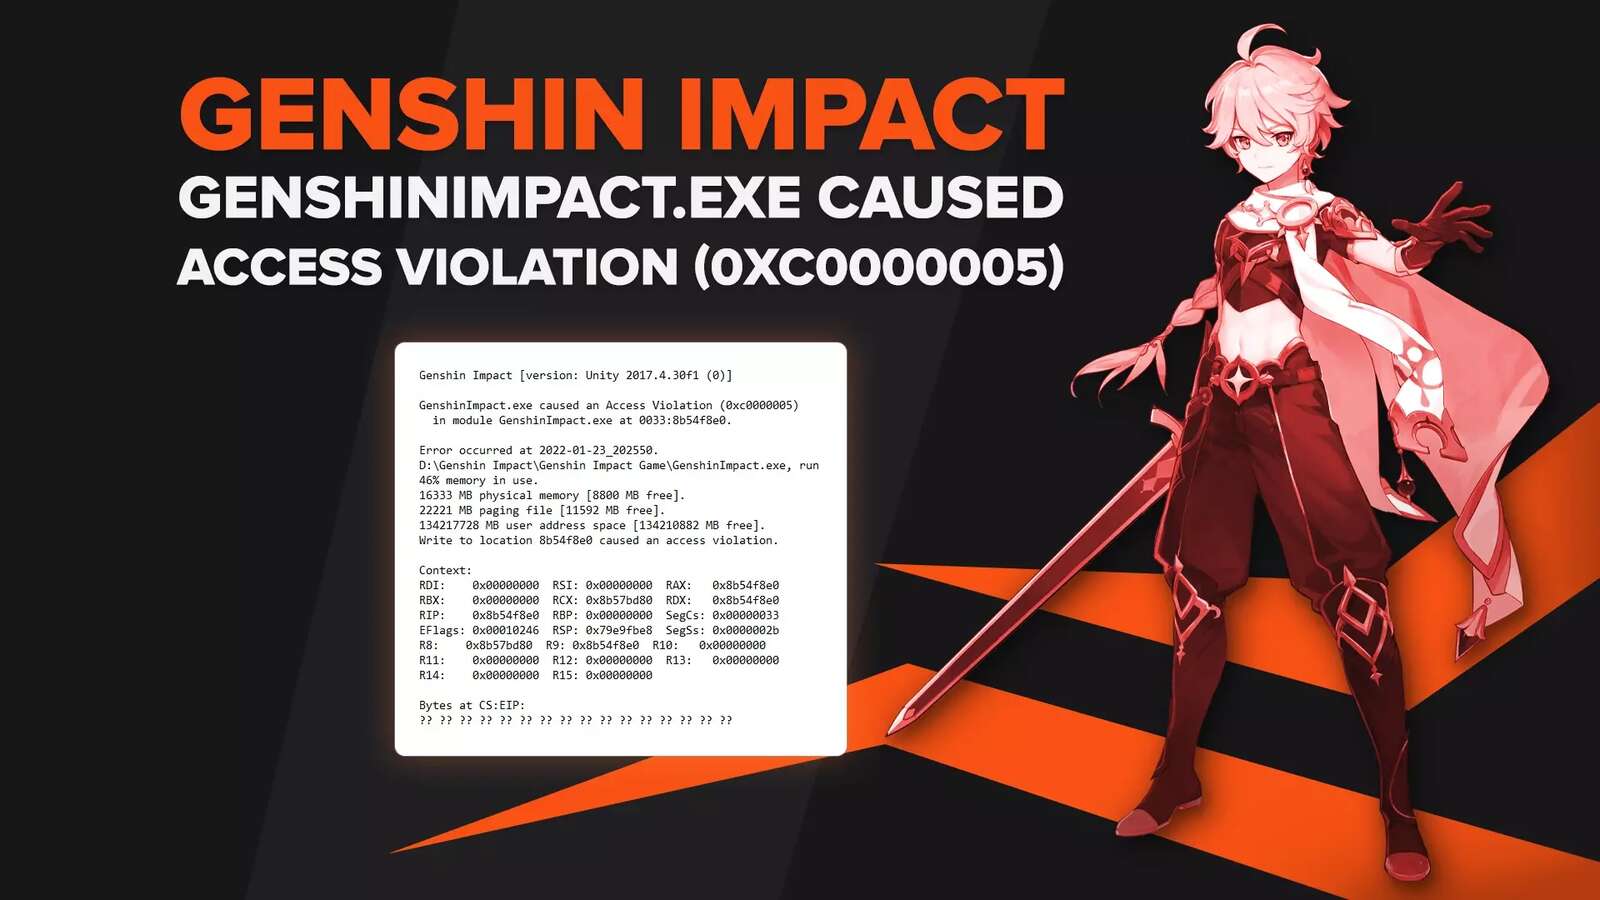 Genshin Impact.exe Caused an Access Violation Fix [Fast Fix]